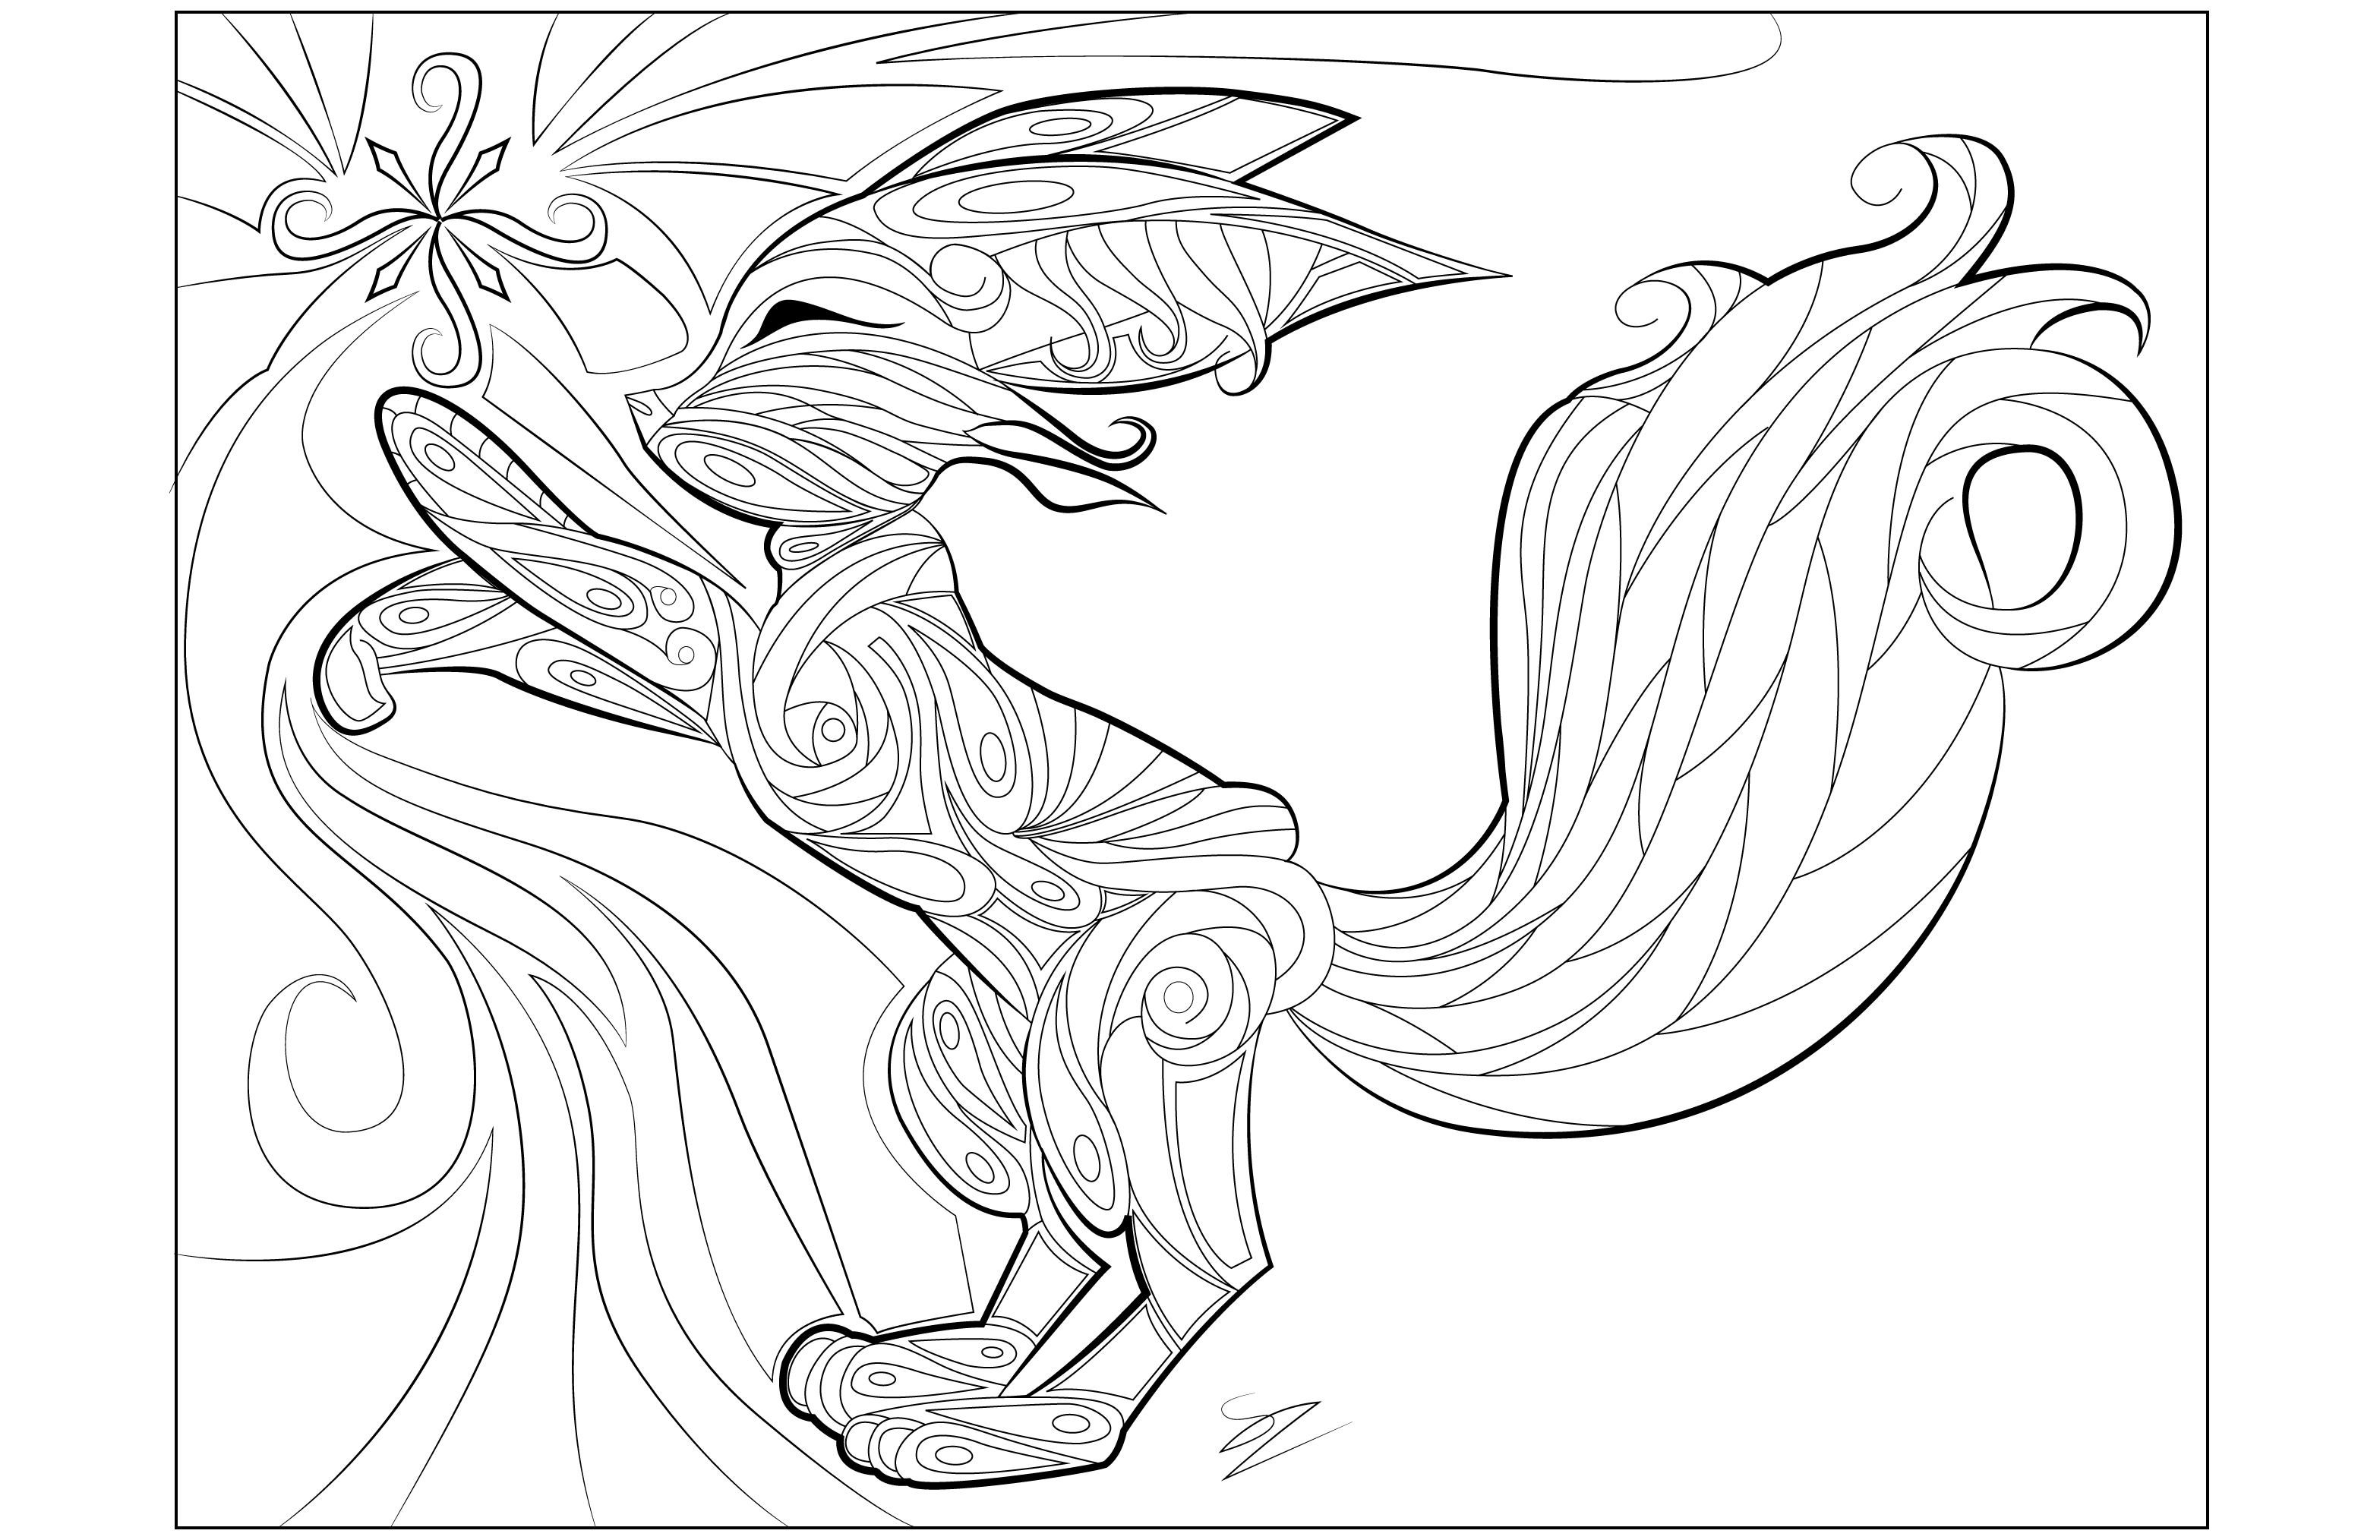 Fennec fox Doodle Foxes Adult Coloring Pages